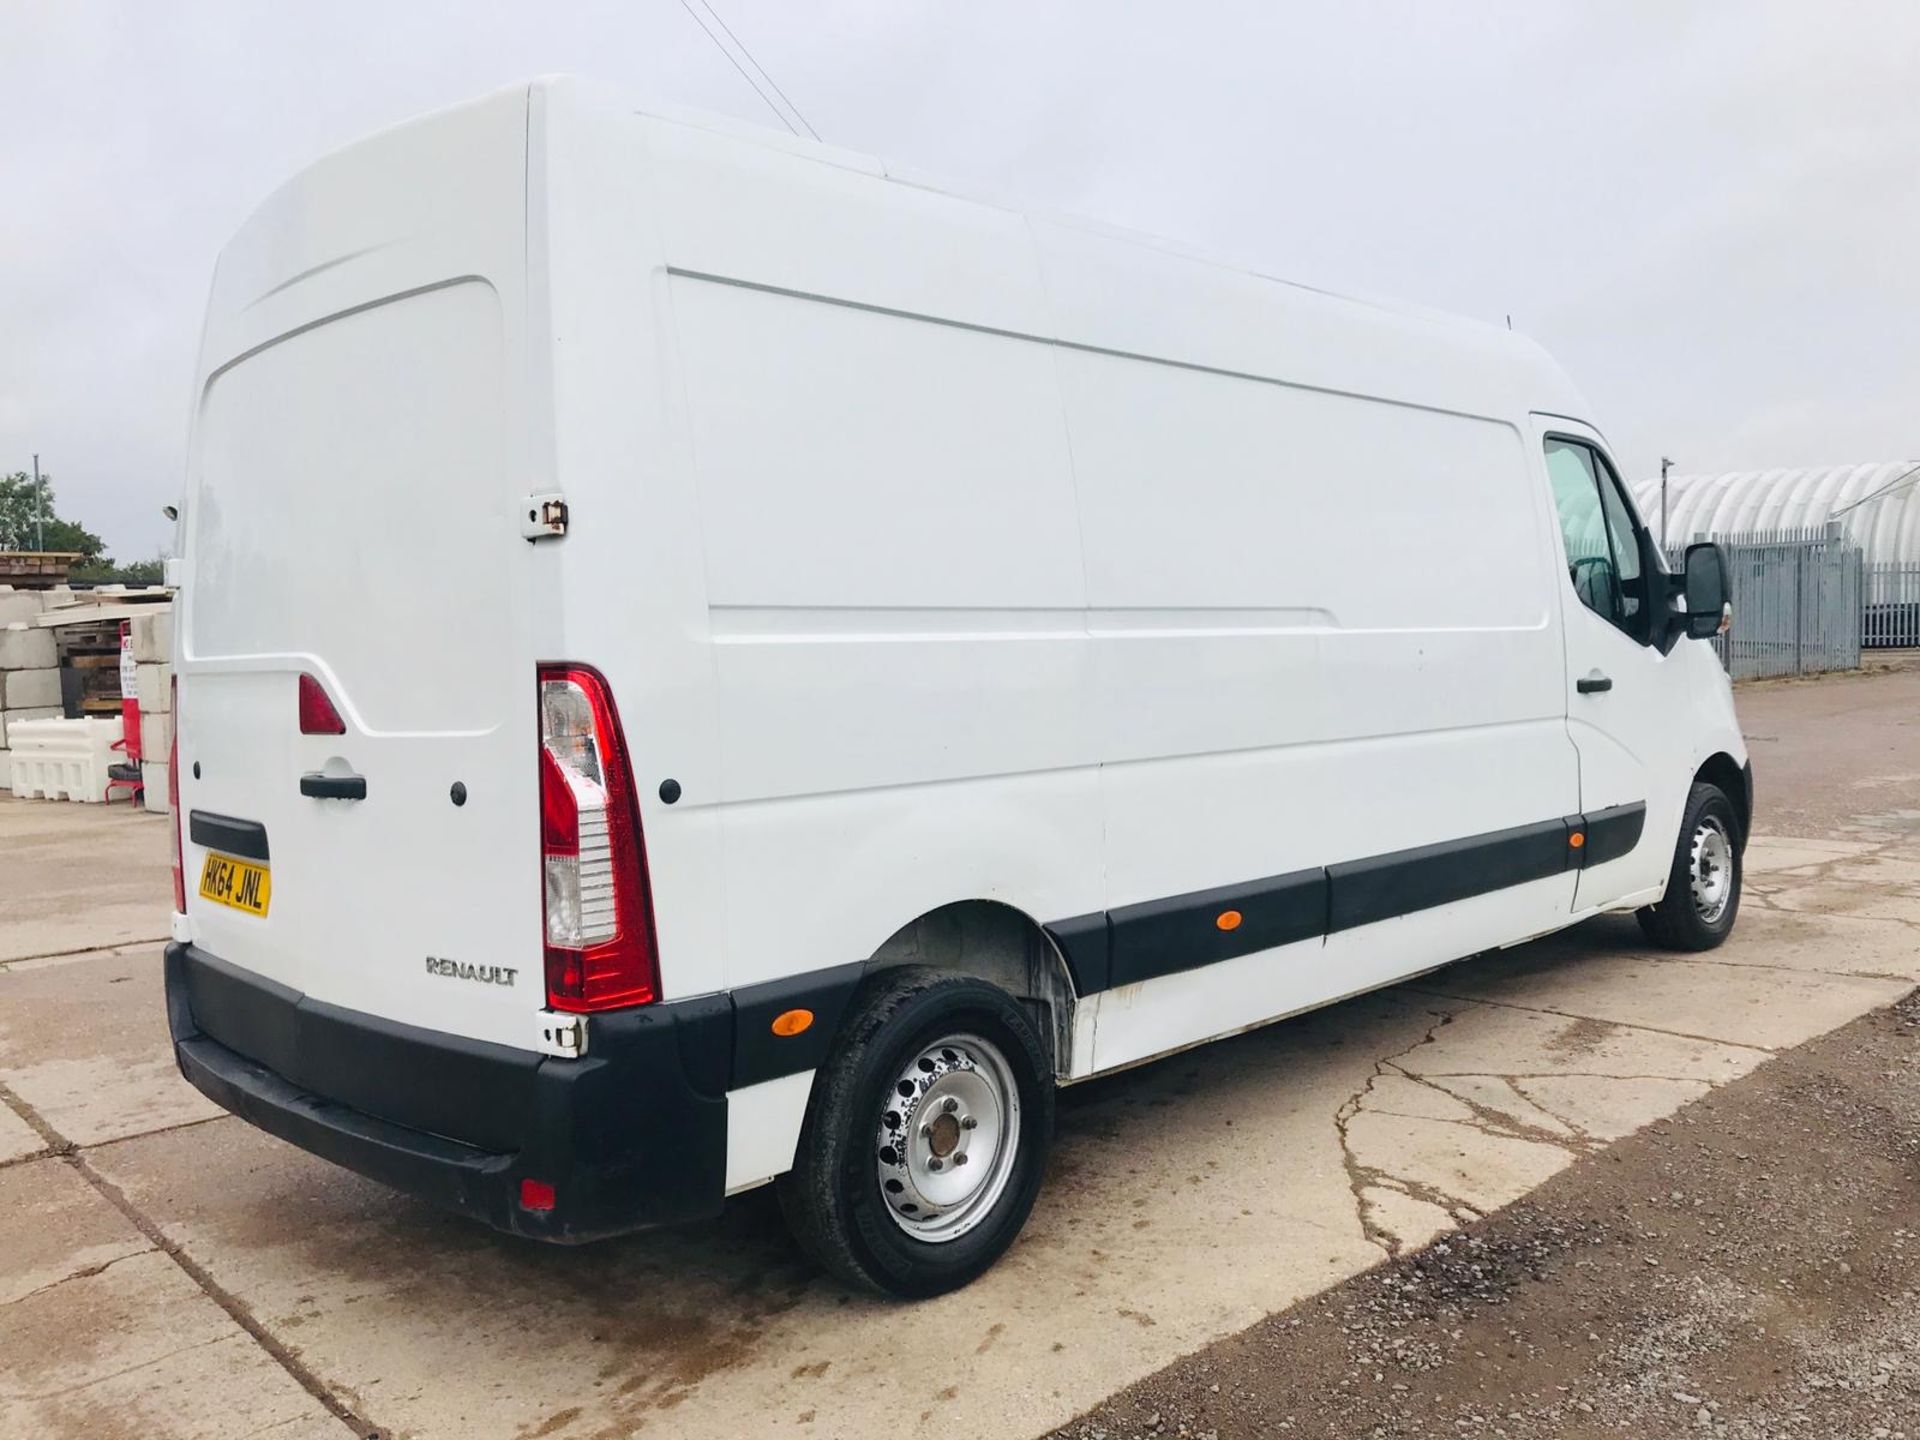 On Sale RENAULT MASTER *BUSINESS EDITION* LWB HI-ROOF (2015 MODEL) '2.3 DCI - 125 BHP - 6 SPEED' - Image 4 of 19